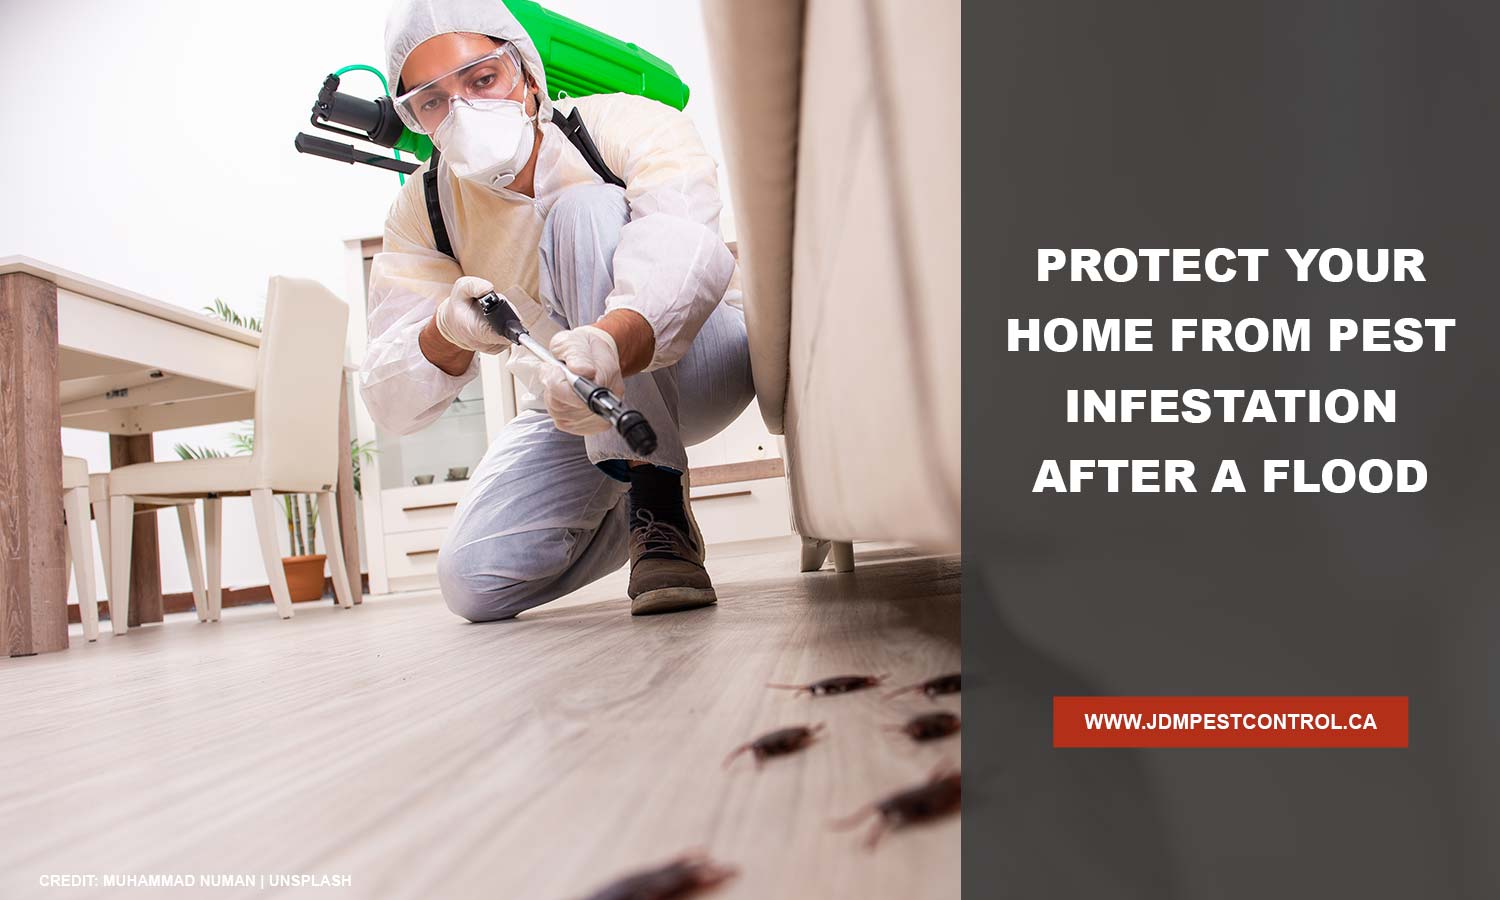 Protect your home from pest infestation after a flood